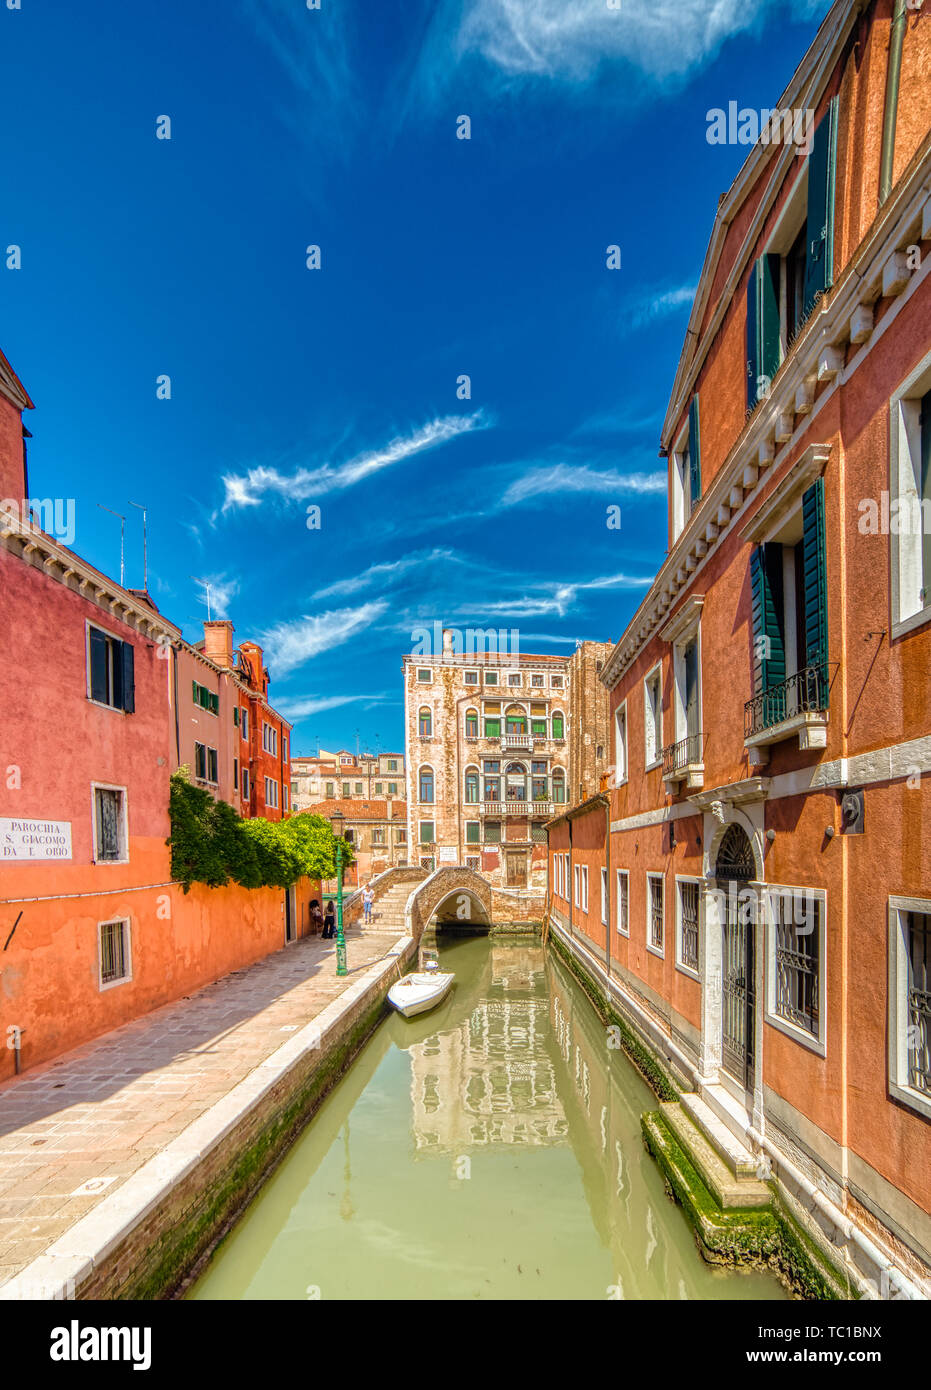 VENEZIA, ITALY – MAY 31, 2019: tourists visiting the city and enjoying the view of waters flowing in Rio di San Boldo, water channel of Venice along F Stock Photo